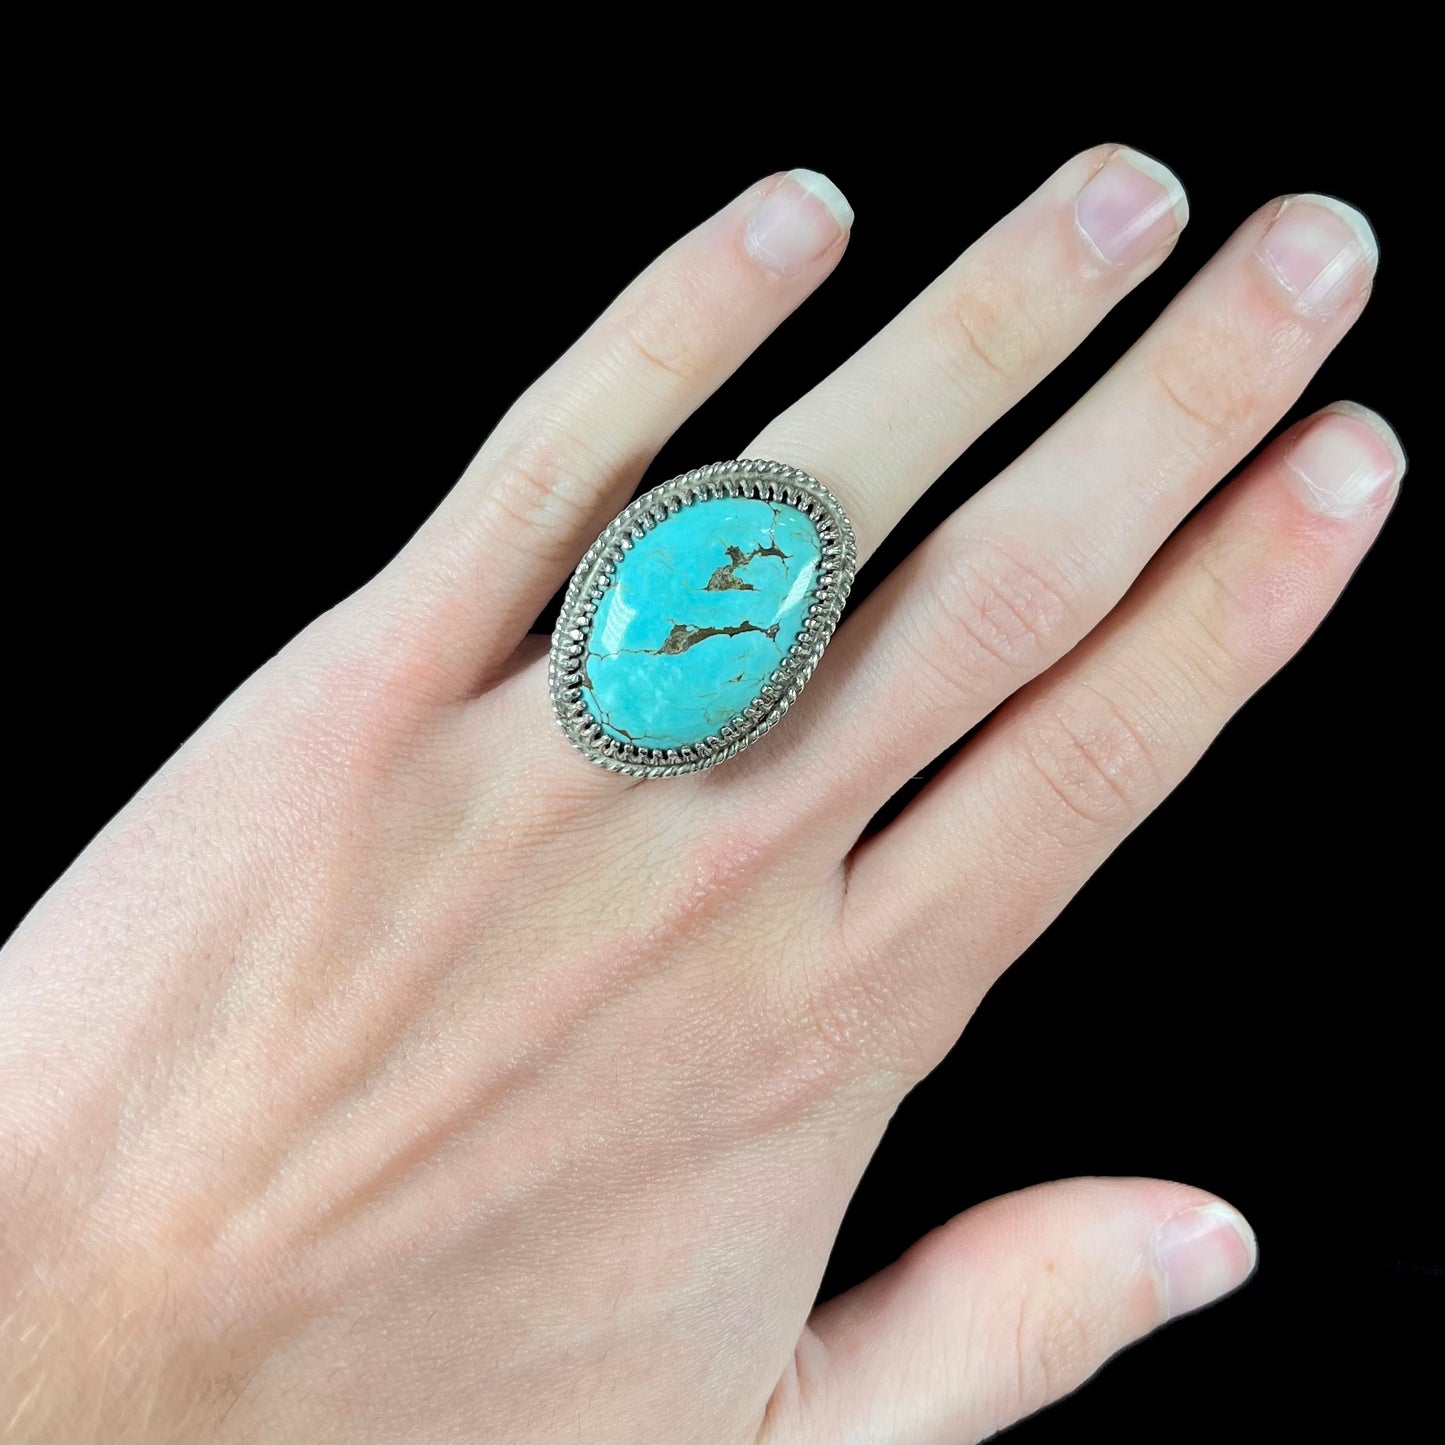 A sterling silver rope design ring set with a turquoise stone from Pilot Mountain Mine, Nevada.